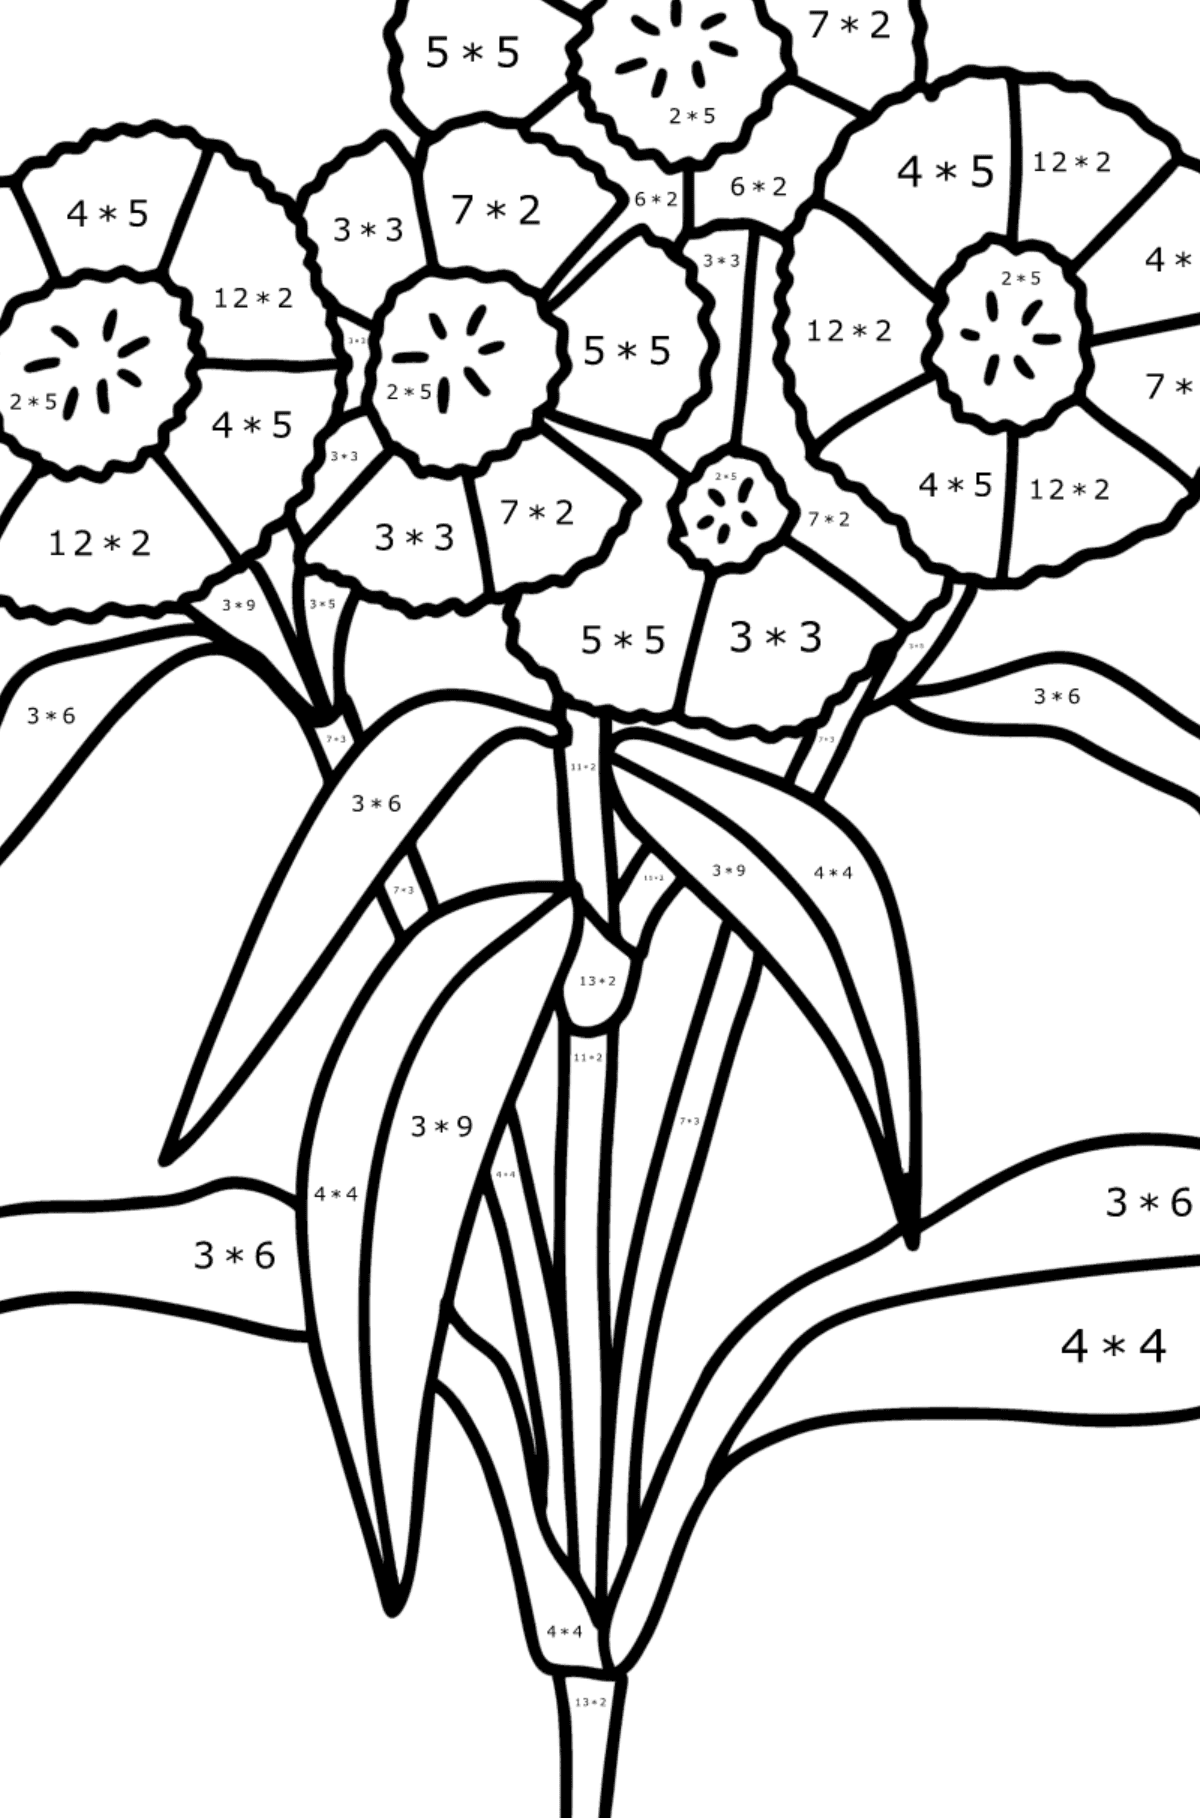 Carnations coloring page - Math Coloring - Multiplication for Kids